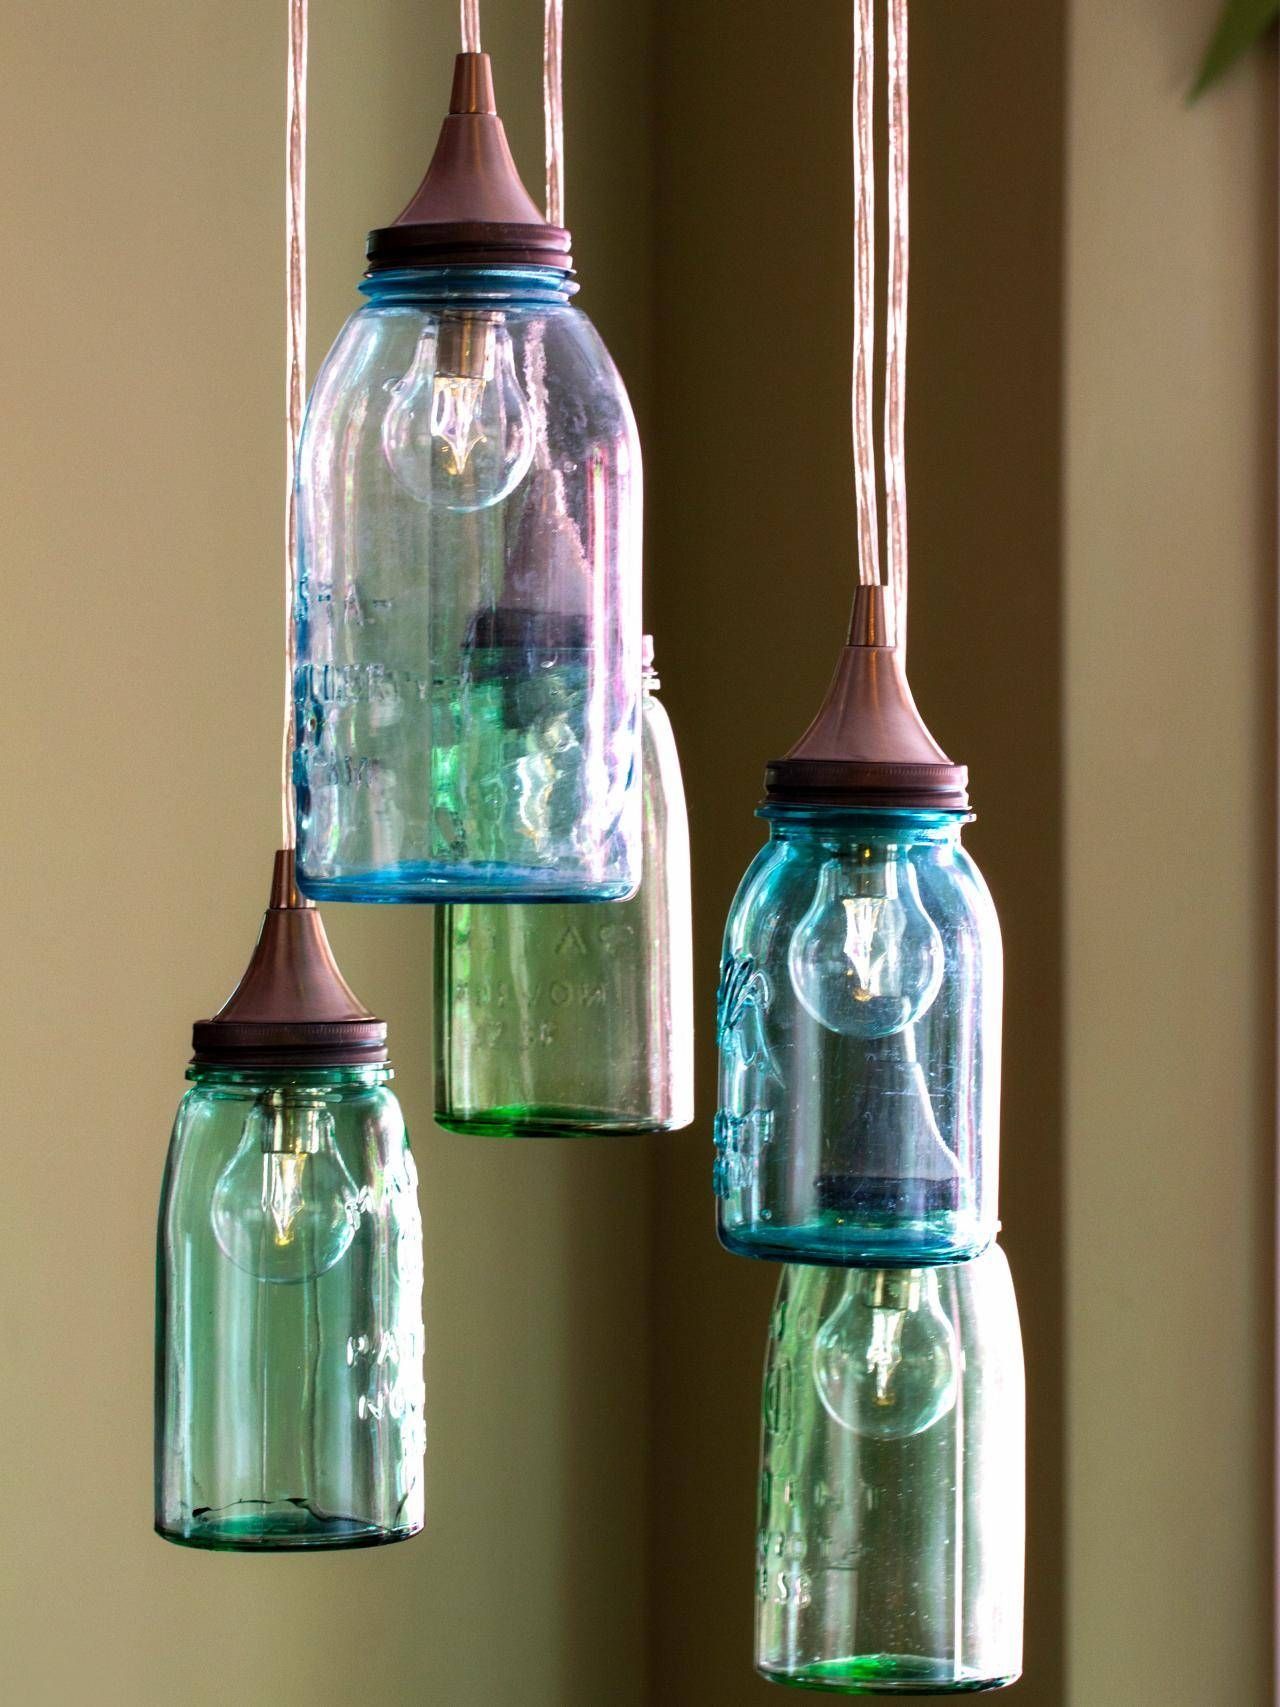 Brighten Up With These Diy Home Lighting Ideas | Hgtv's Decorating Within Glass Jug Lights Fixtures (View 10 of 15)